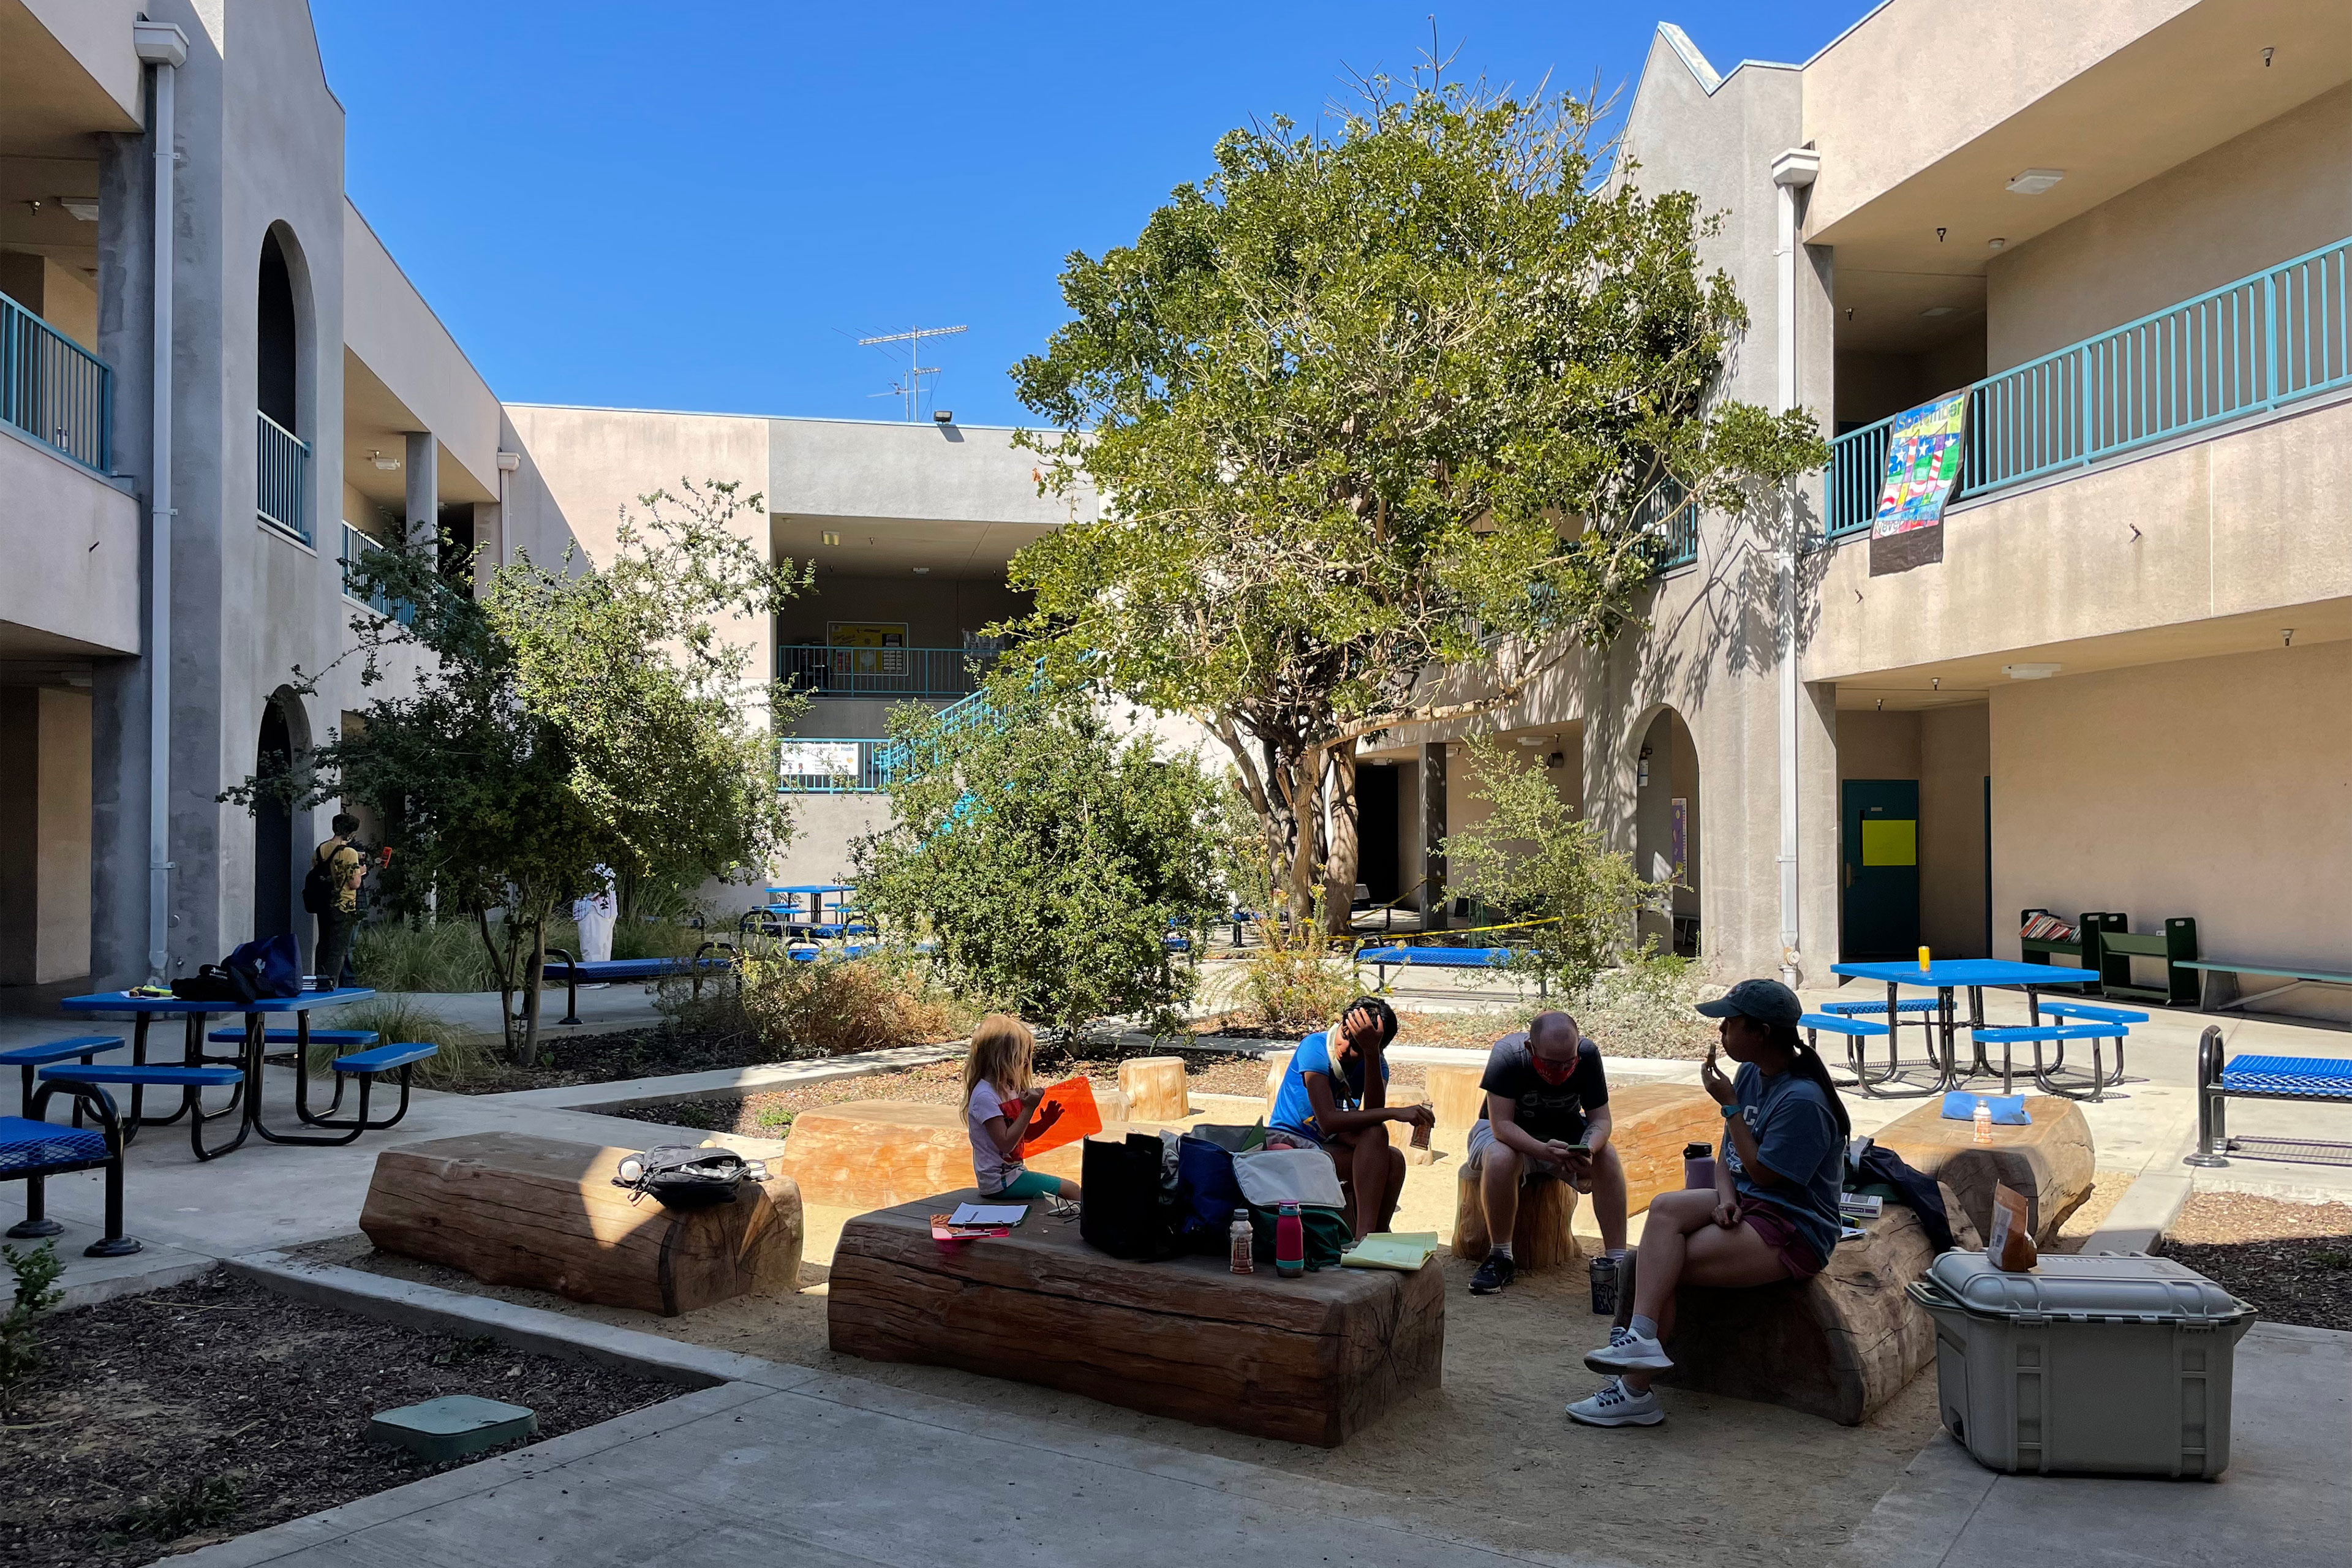 A photo of people sitting in a shaded courtyard.